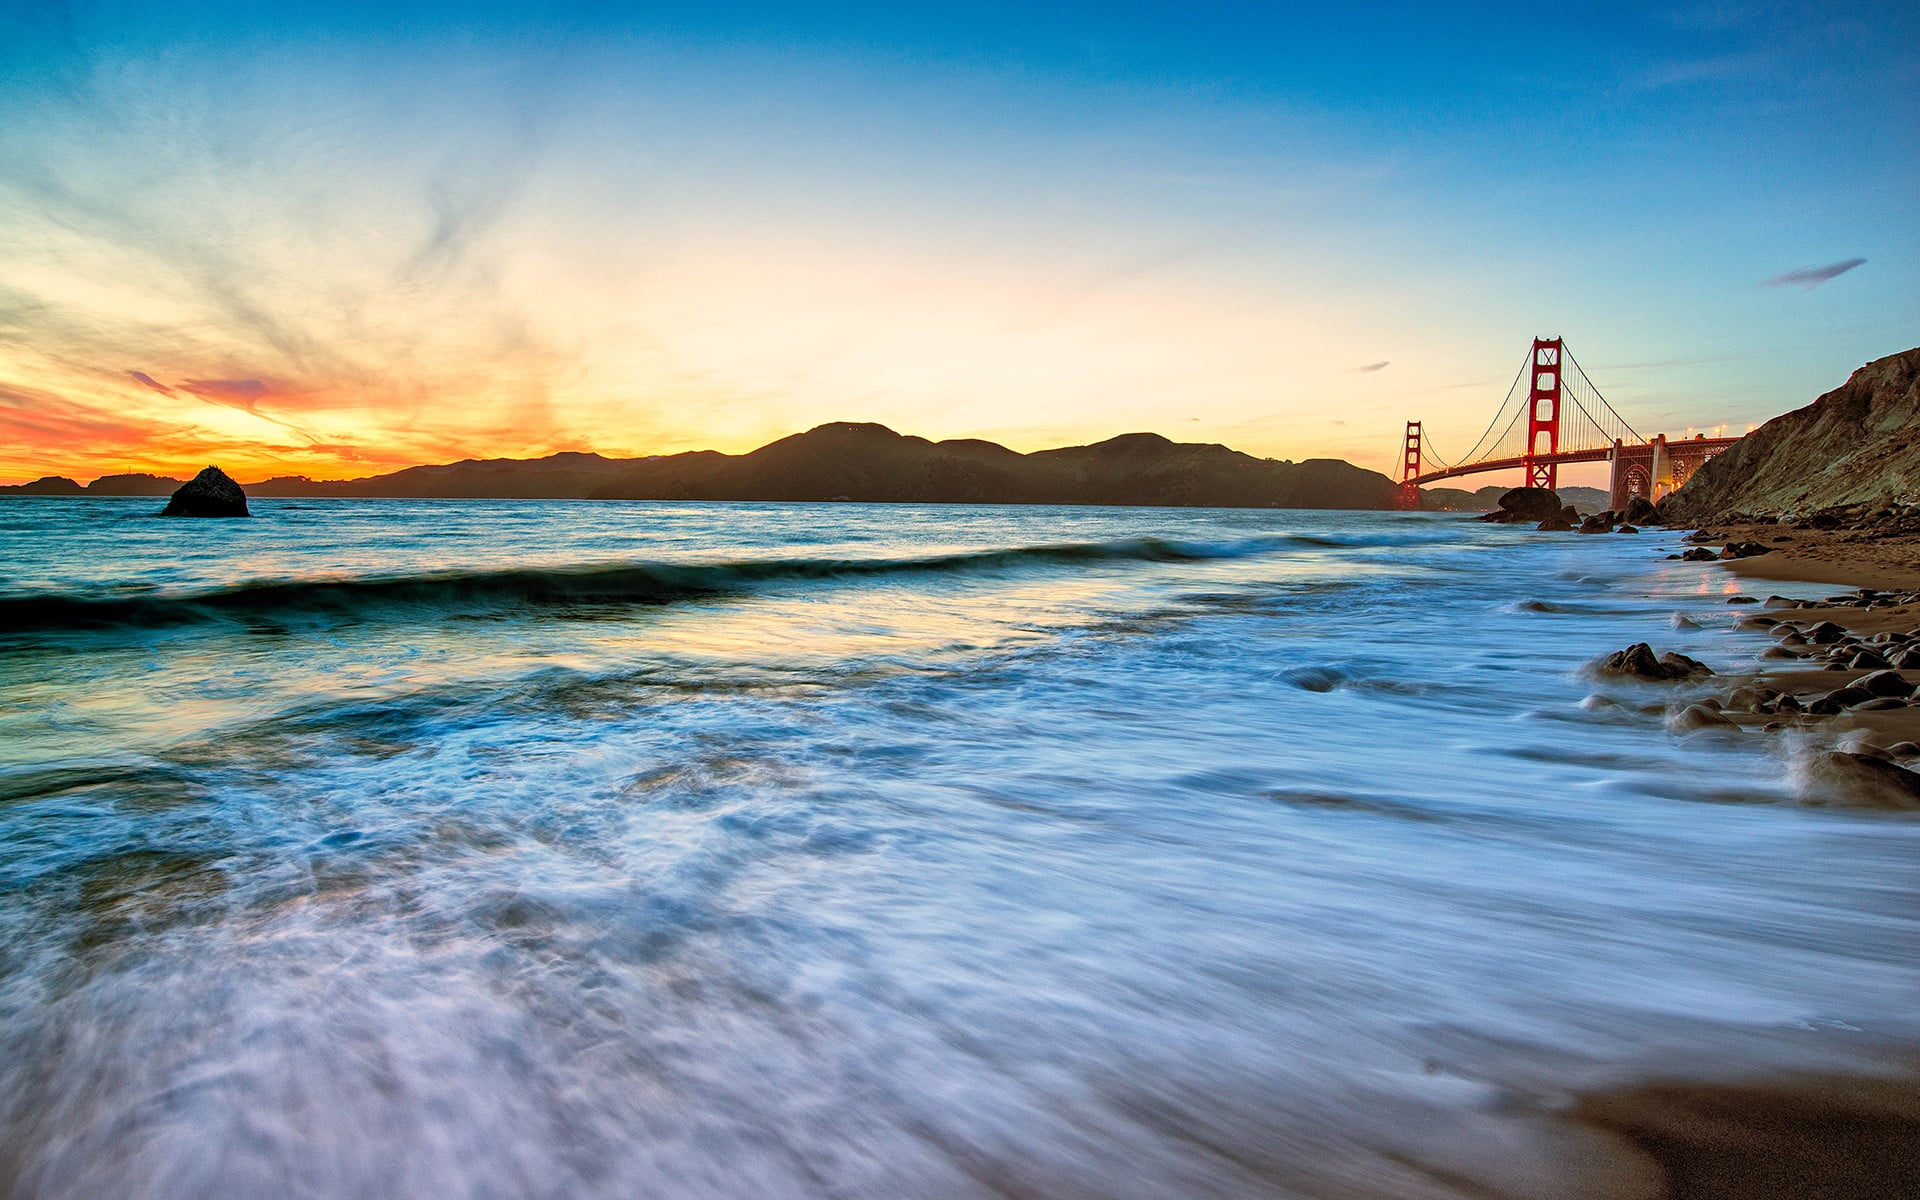 white and blue boat on body of water painting, sunset, beach, Golden Gate Bridge, USA